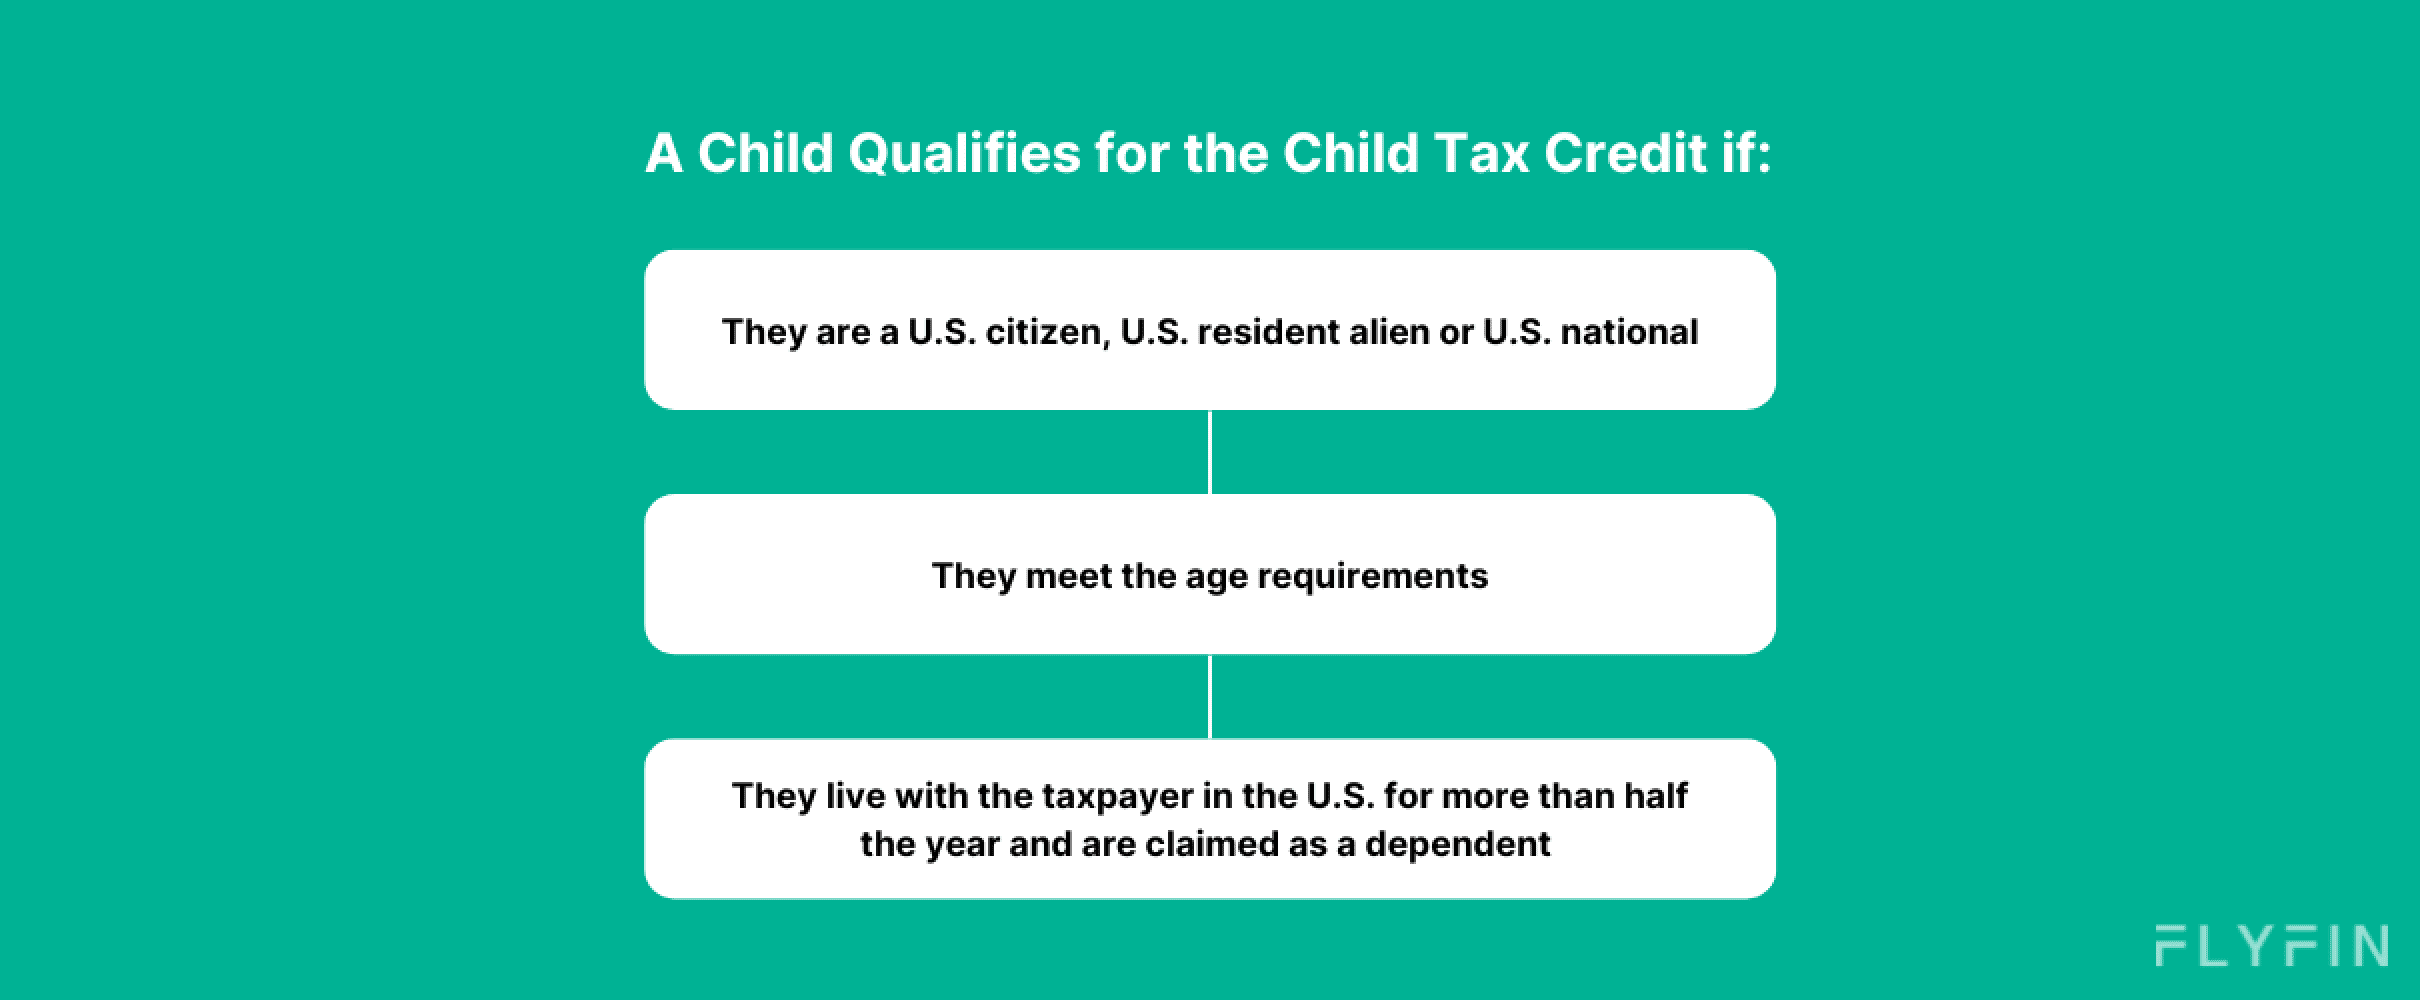 Who qualifies for the Child Tax Credit?